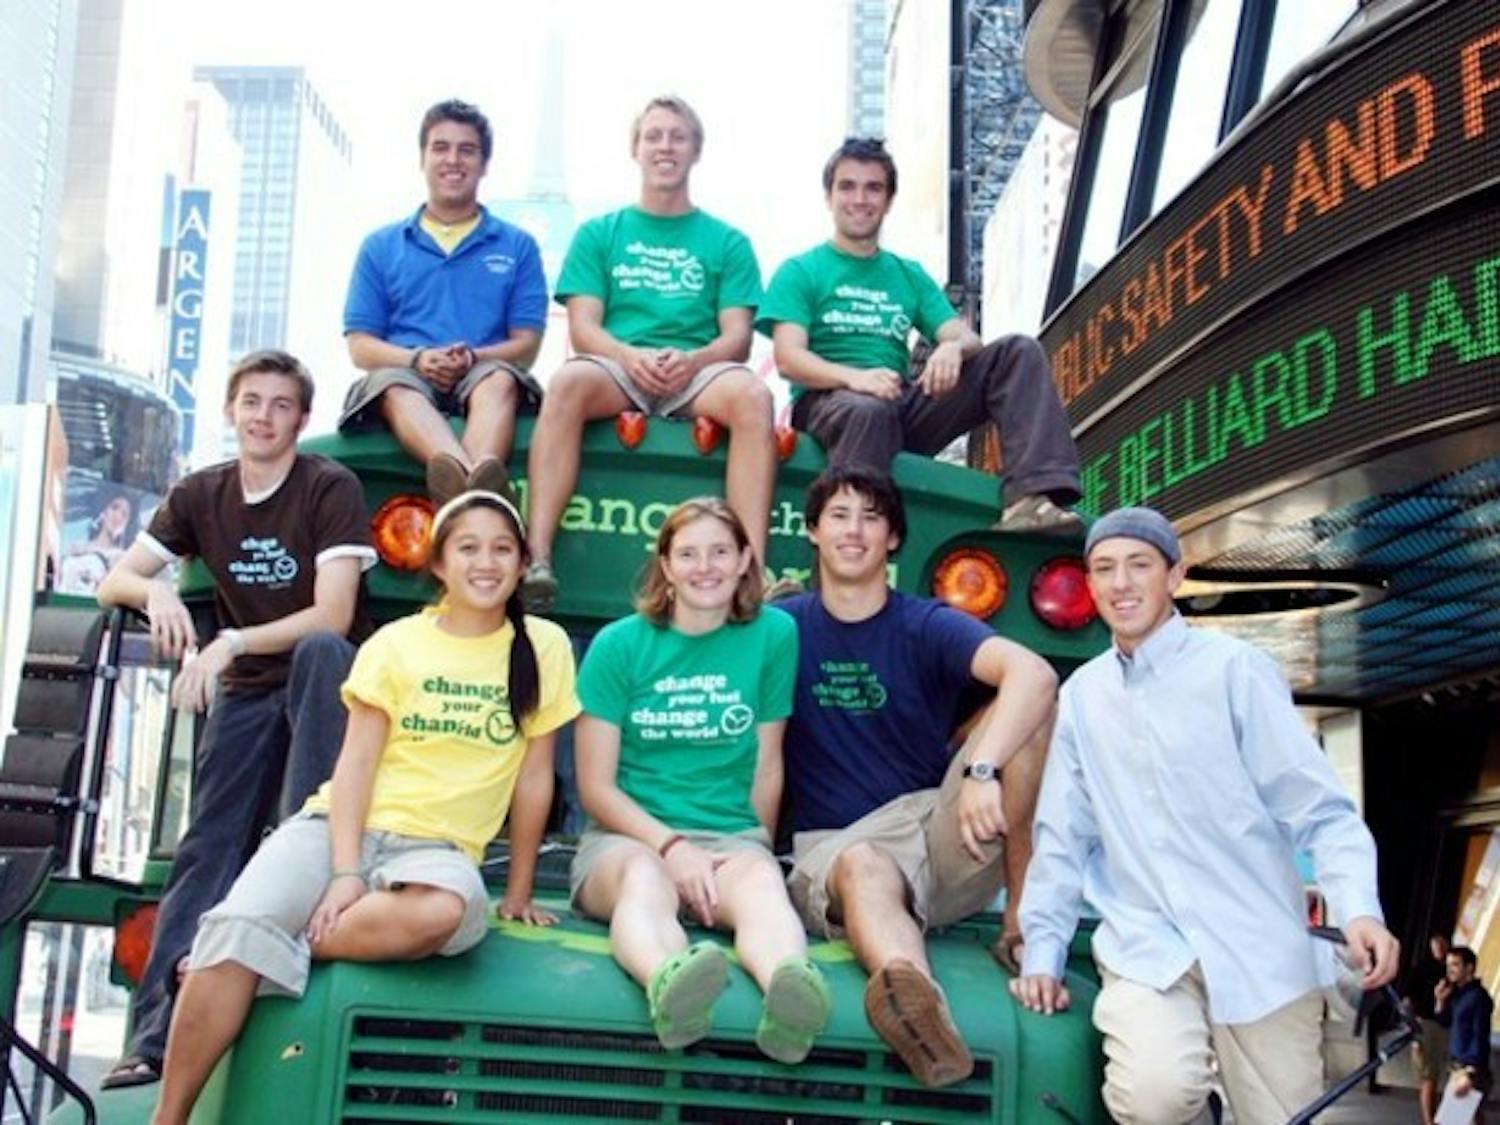 Students accompanying the Big Green Bus pause in Times Square, one of about 50 stops nationwide, to pose with their vegetable-oil powered vehicle.